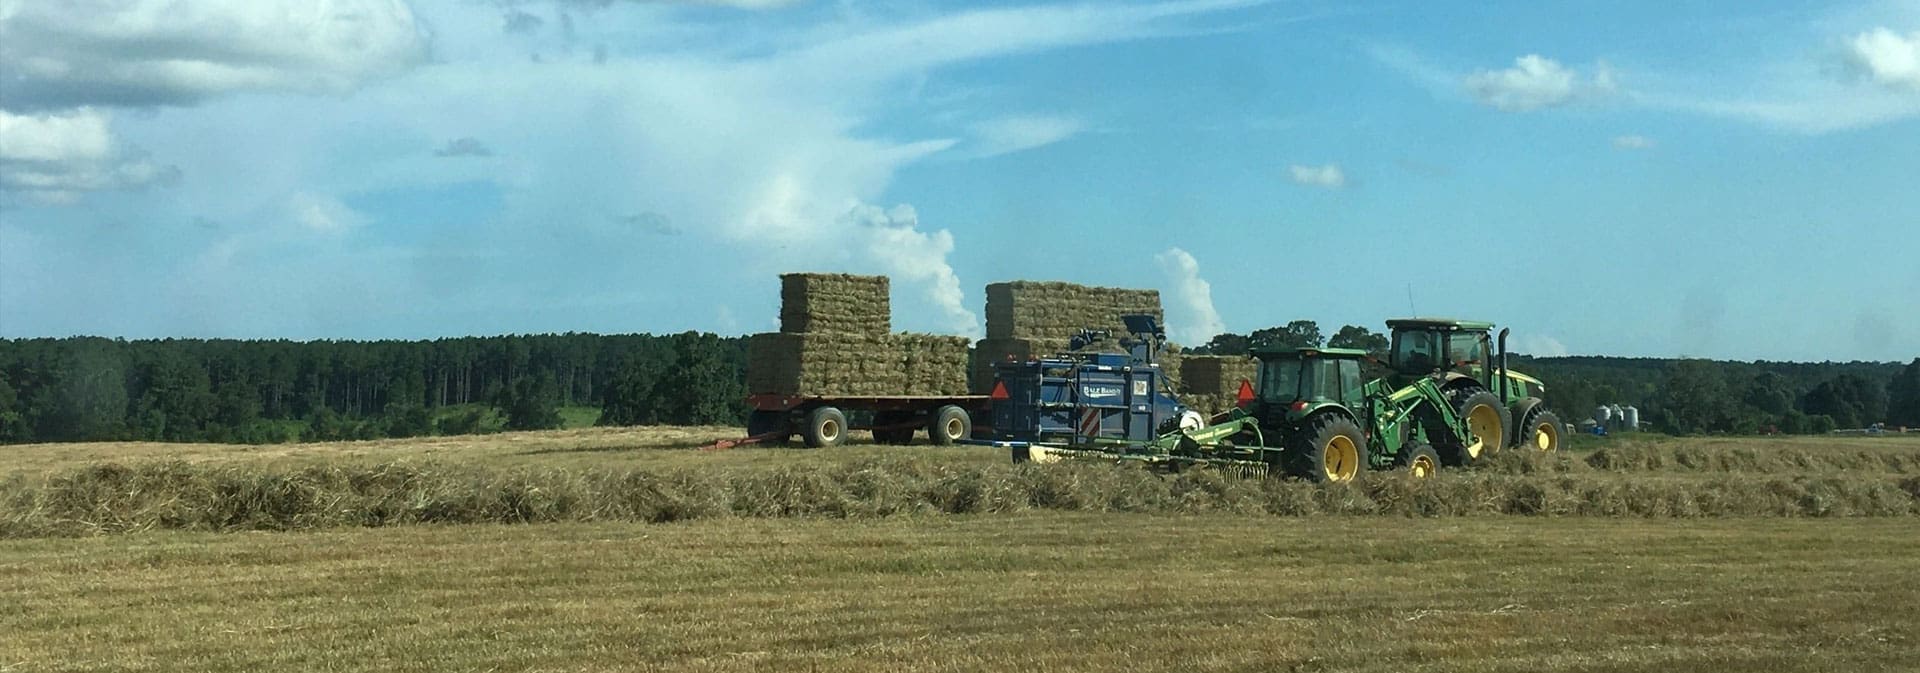 A tractor pulling hay bales in the middle of a field.